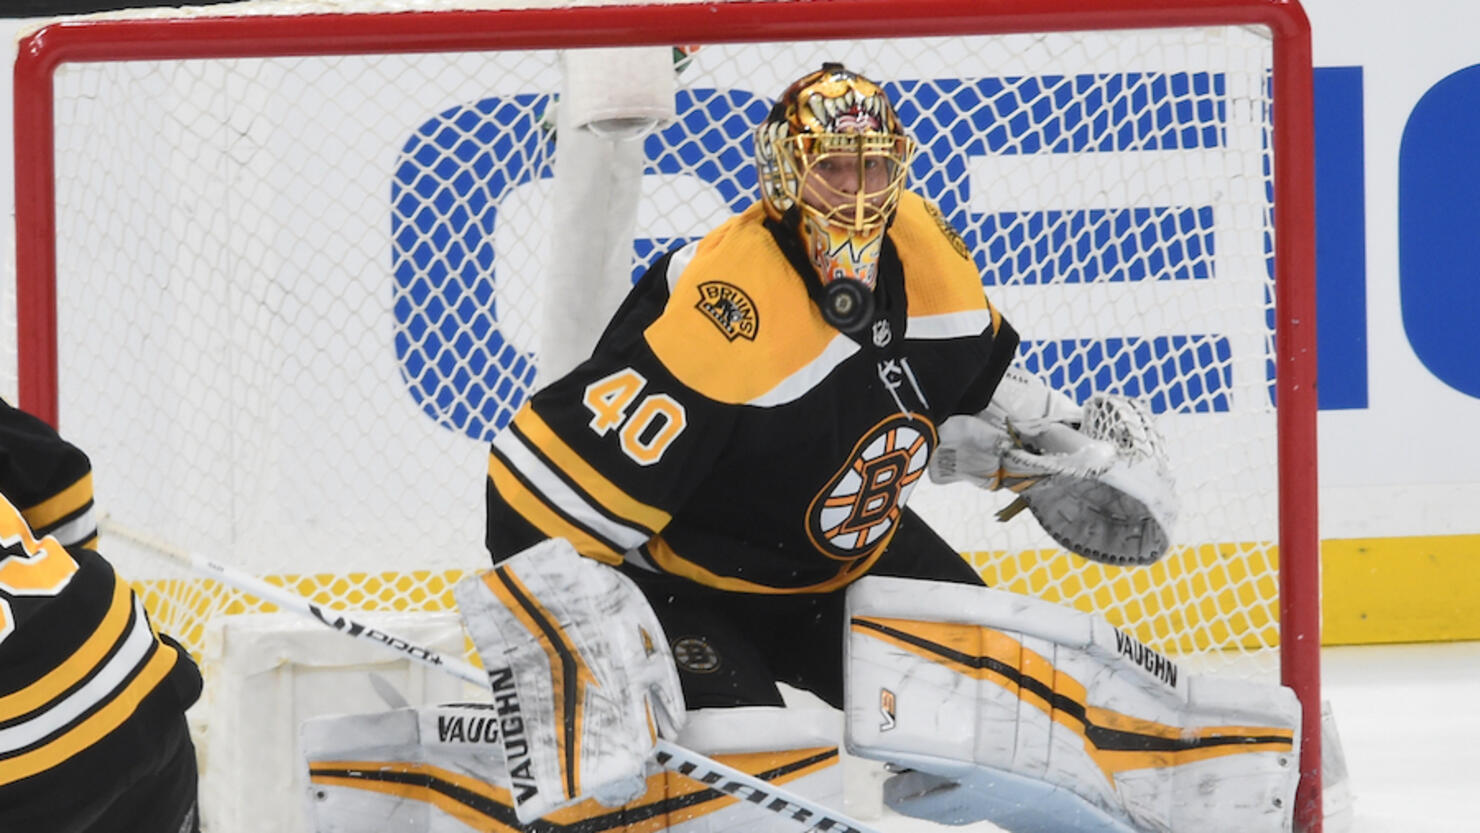 Rask close to return with Bruins, signs with Providence